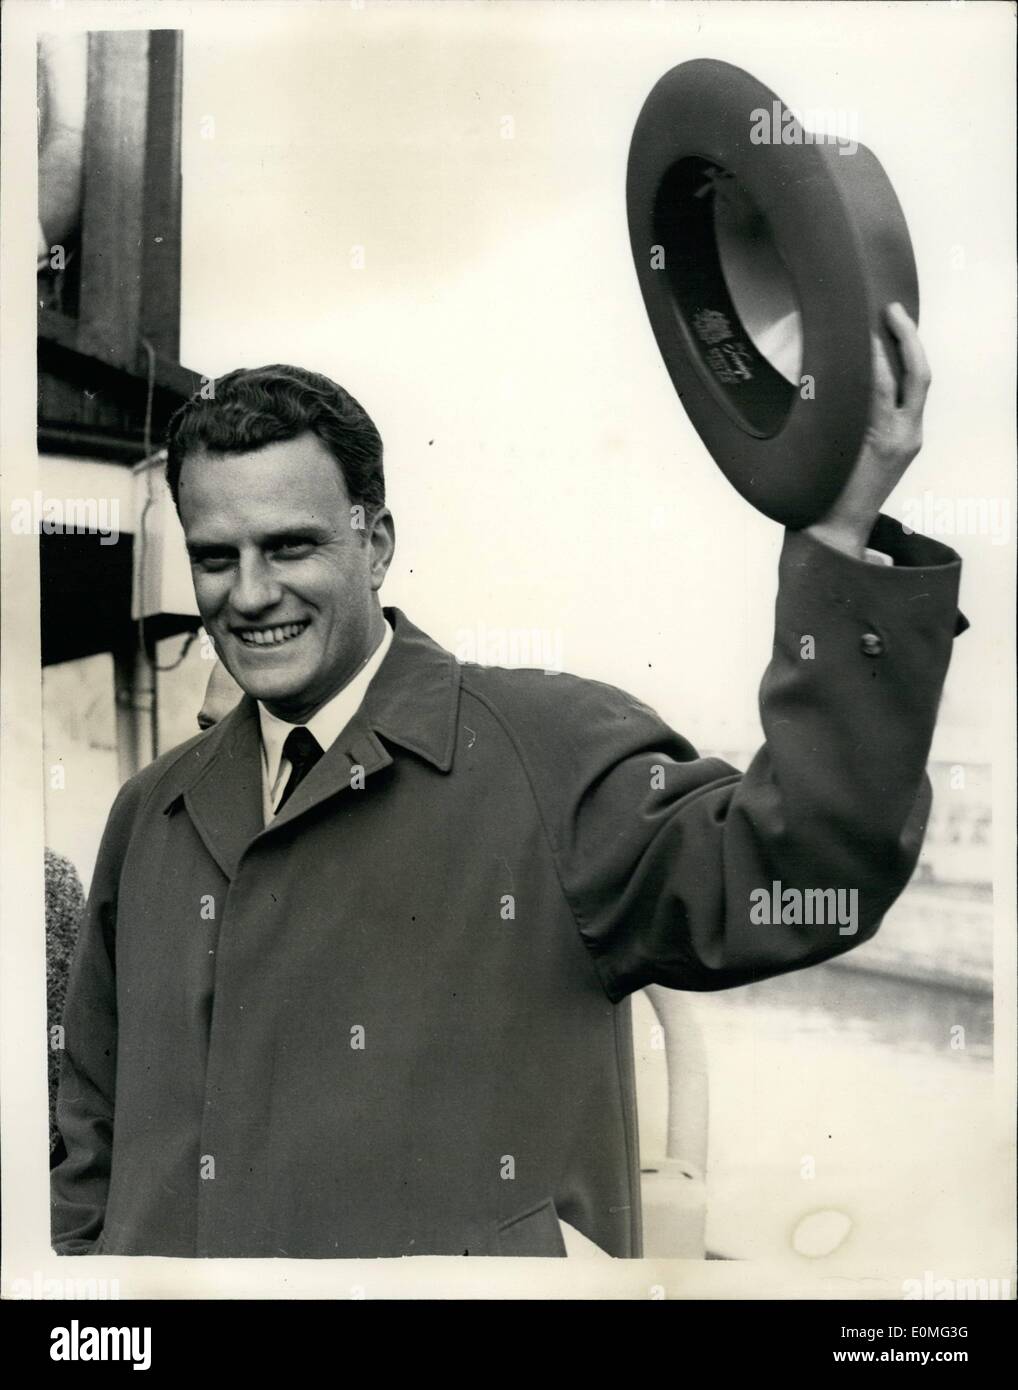 Mar. 03, 1955 - Billy Graham gets a great welcome at Plymouth.: Billy Graham the American Evangelist received a great welcome when he arrived at Plymouth today for the start of another tour if the British Isles. Before traveling to London to catch the night train for Glassgow - he visited the ''Pilgrim's Stone'' at Plymouth Barbican - from nce the Pilgrim Fathers left Plymouth for the founding of America. Photo shows Billy Graham waves his hat in greeting when he arrived at Plymouth today. Stock Photo